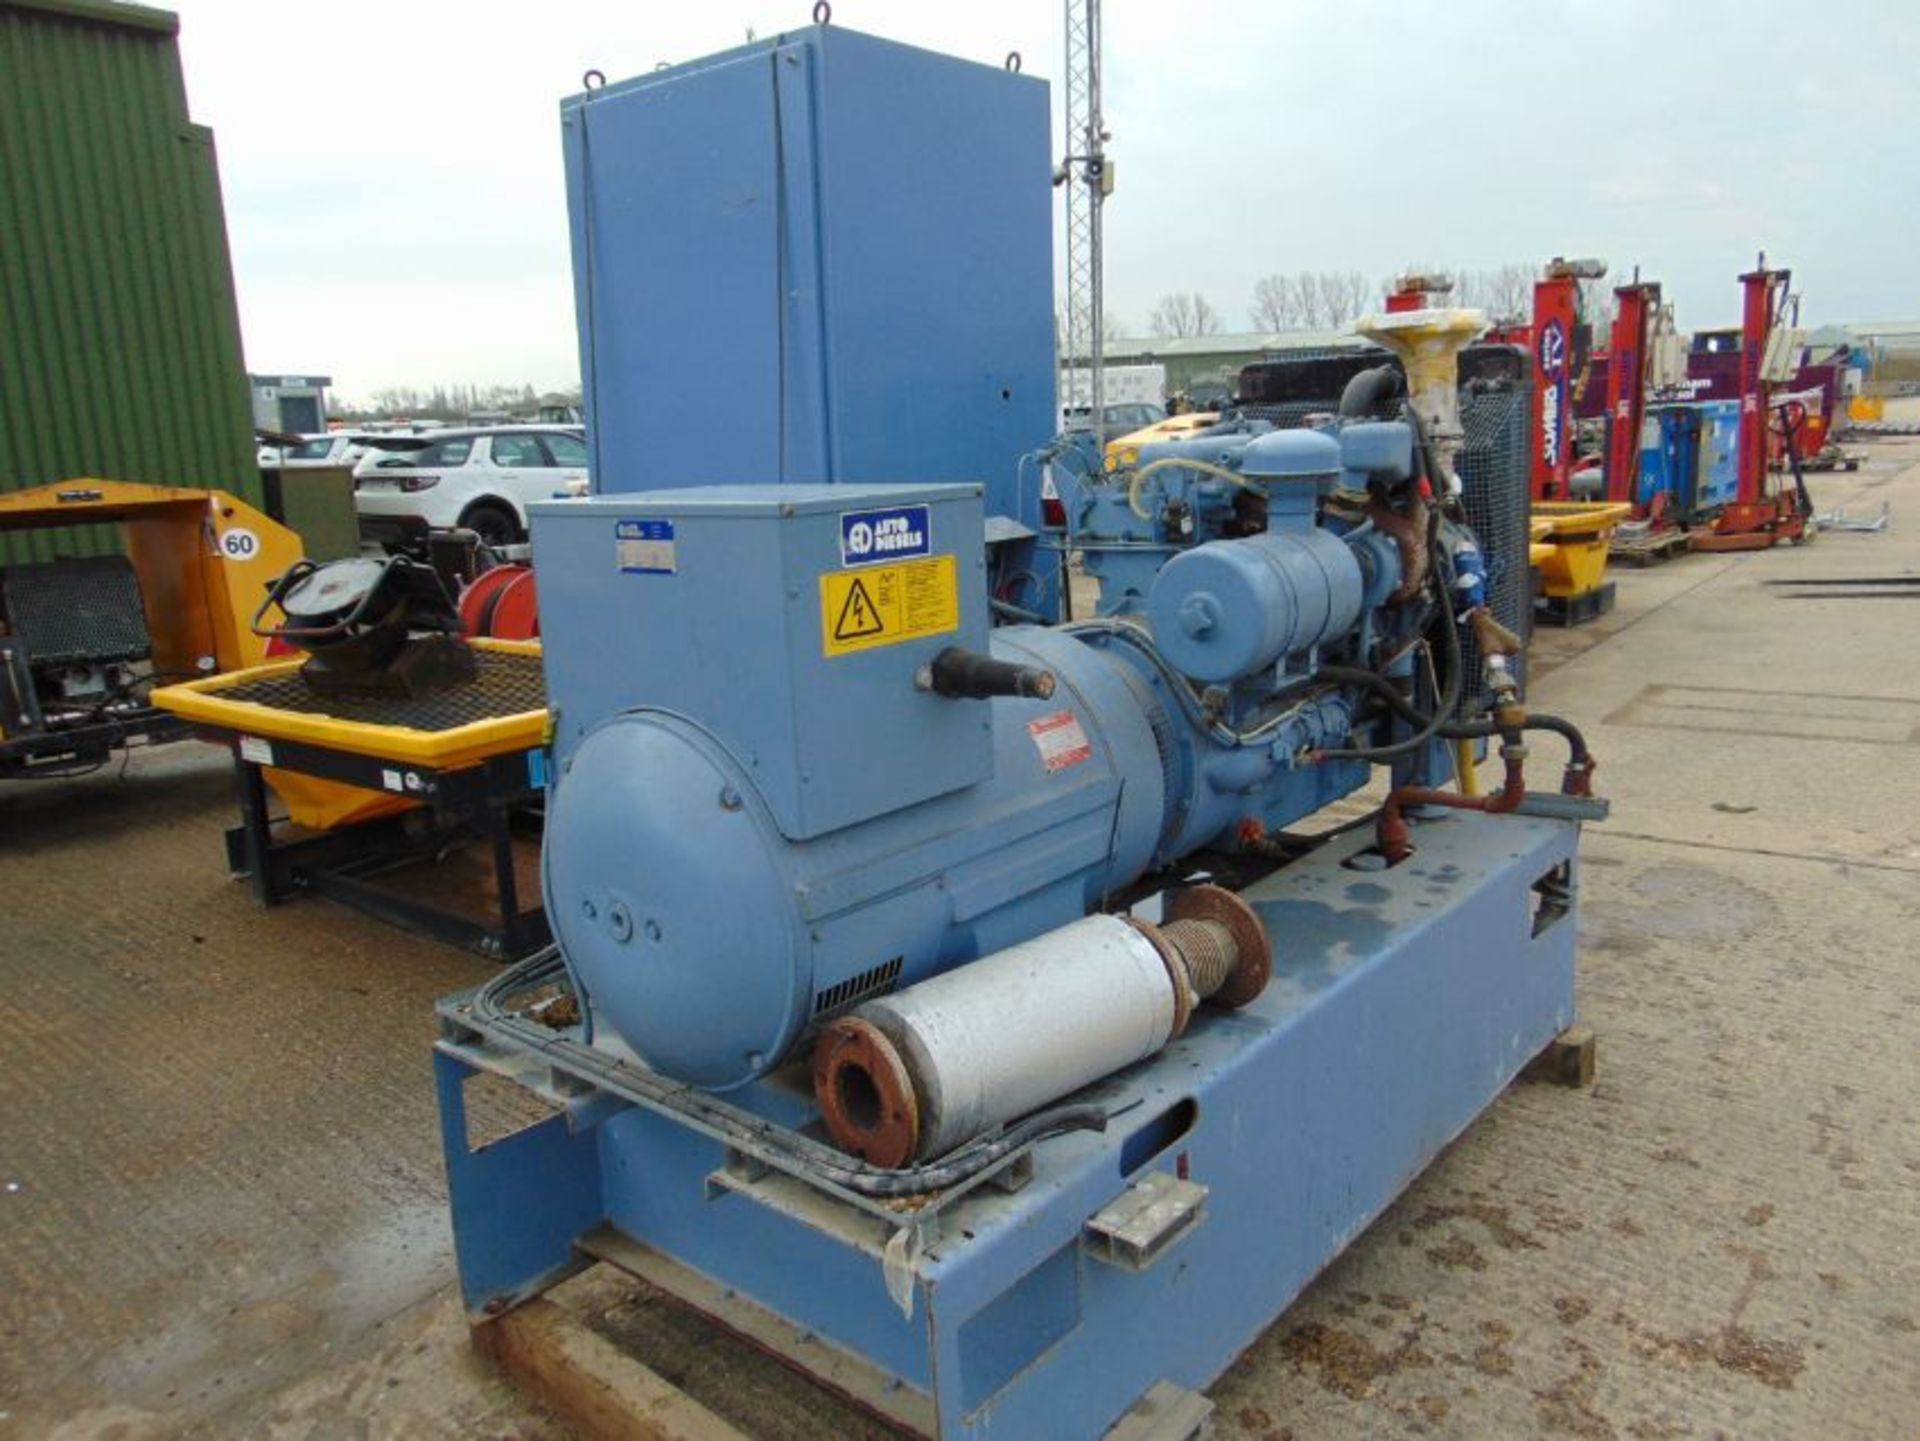 Auto Diesel 85 KVA 68 Kw 3 Phase 415/240V Standby Mains Faliure Perkins Diesel Generator 807 HOURS! - Image 4 of 20